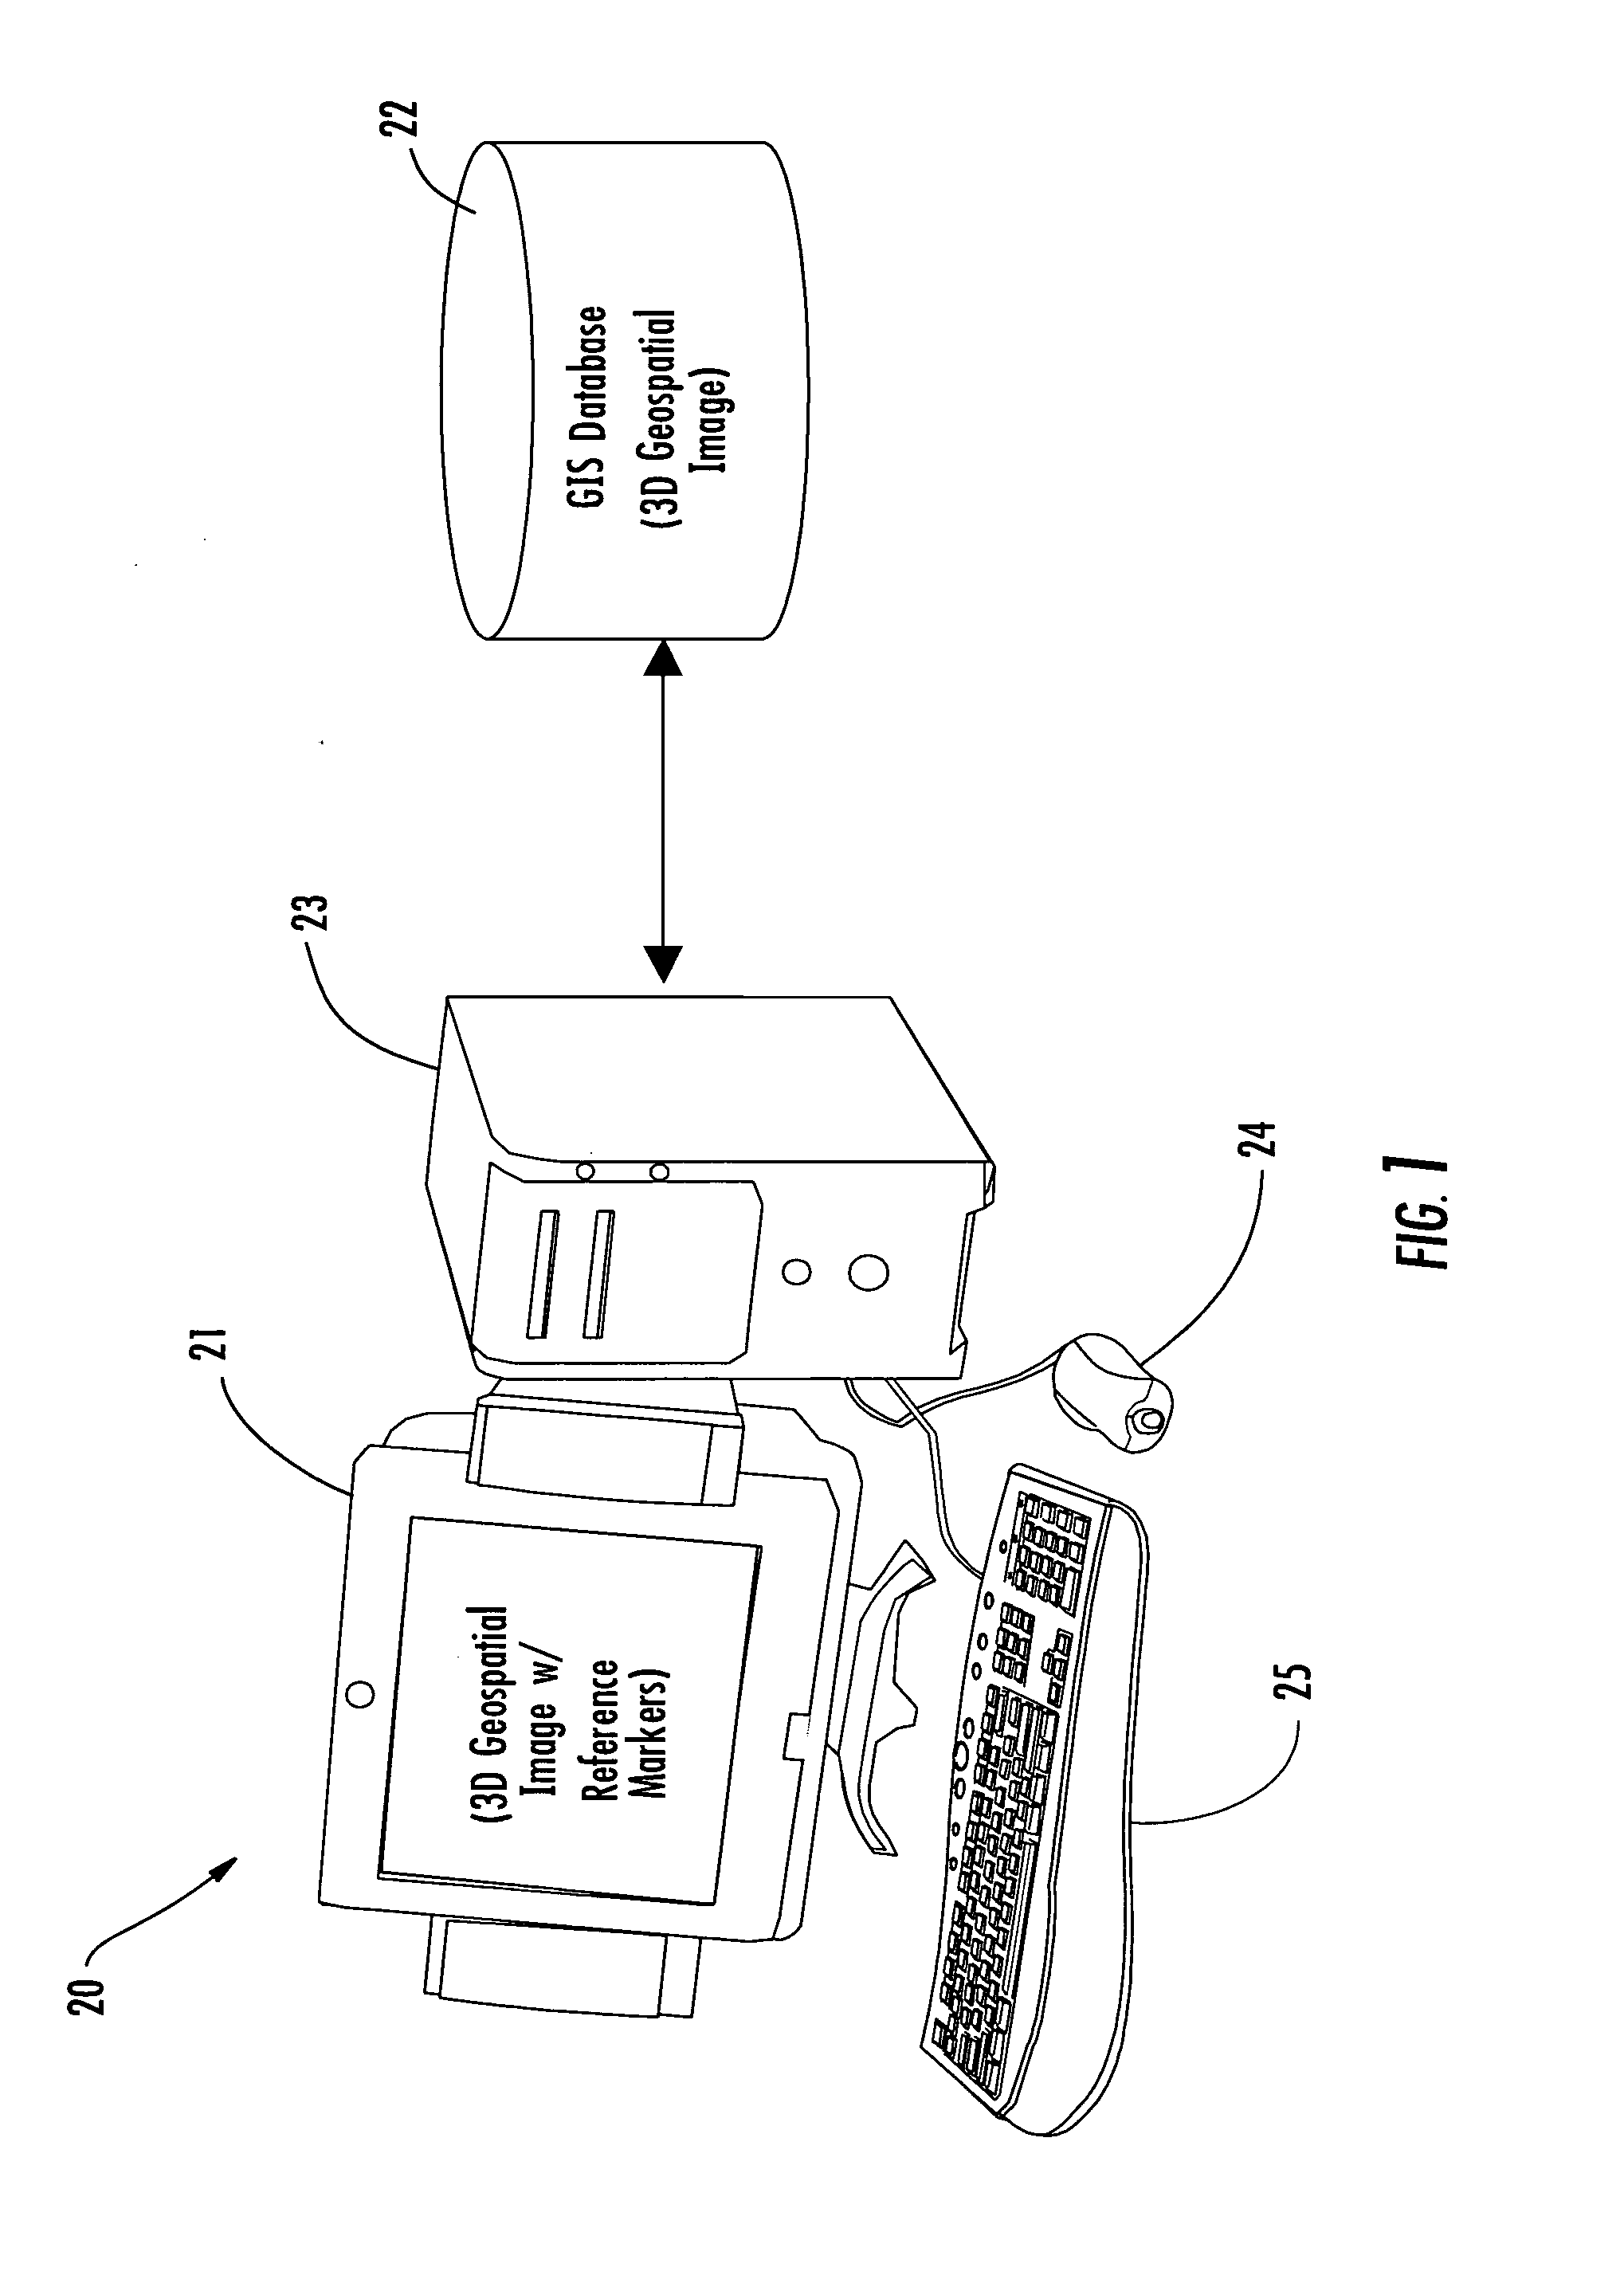 Geographic information system (GIS) for displaying 3D geospatial images with reference markers and related methods